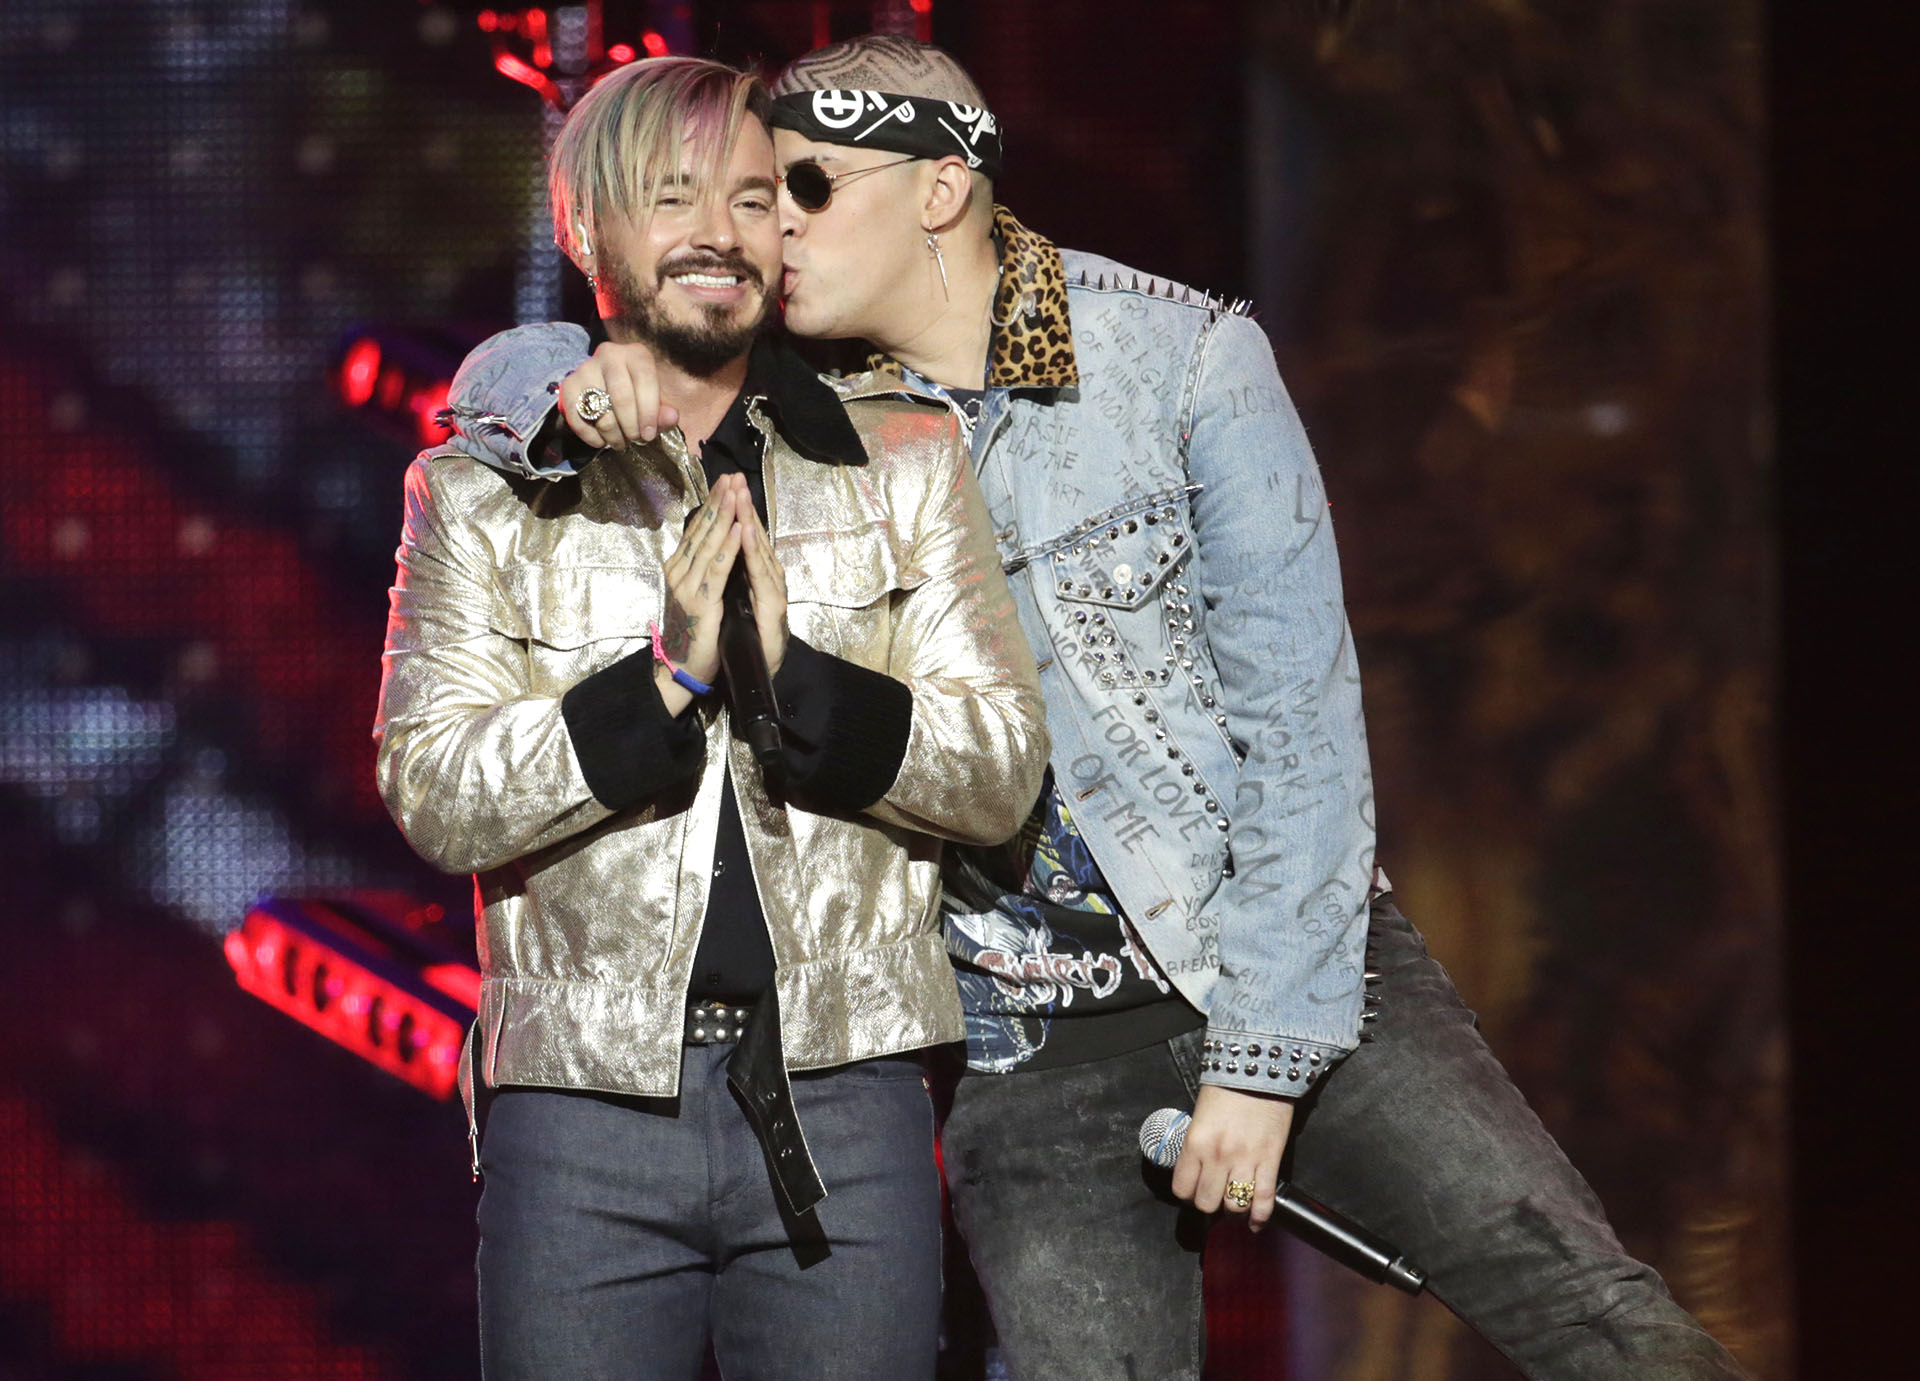 Bad Bunny kissed J Balvin after his performance at the ceremony